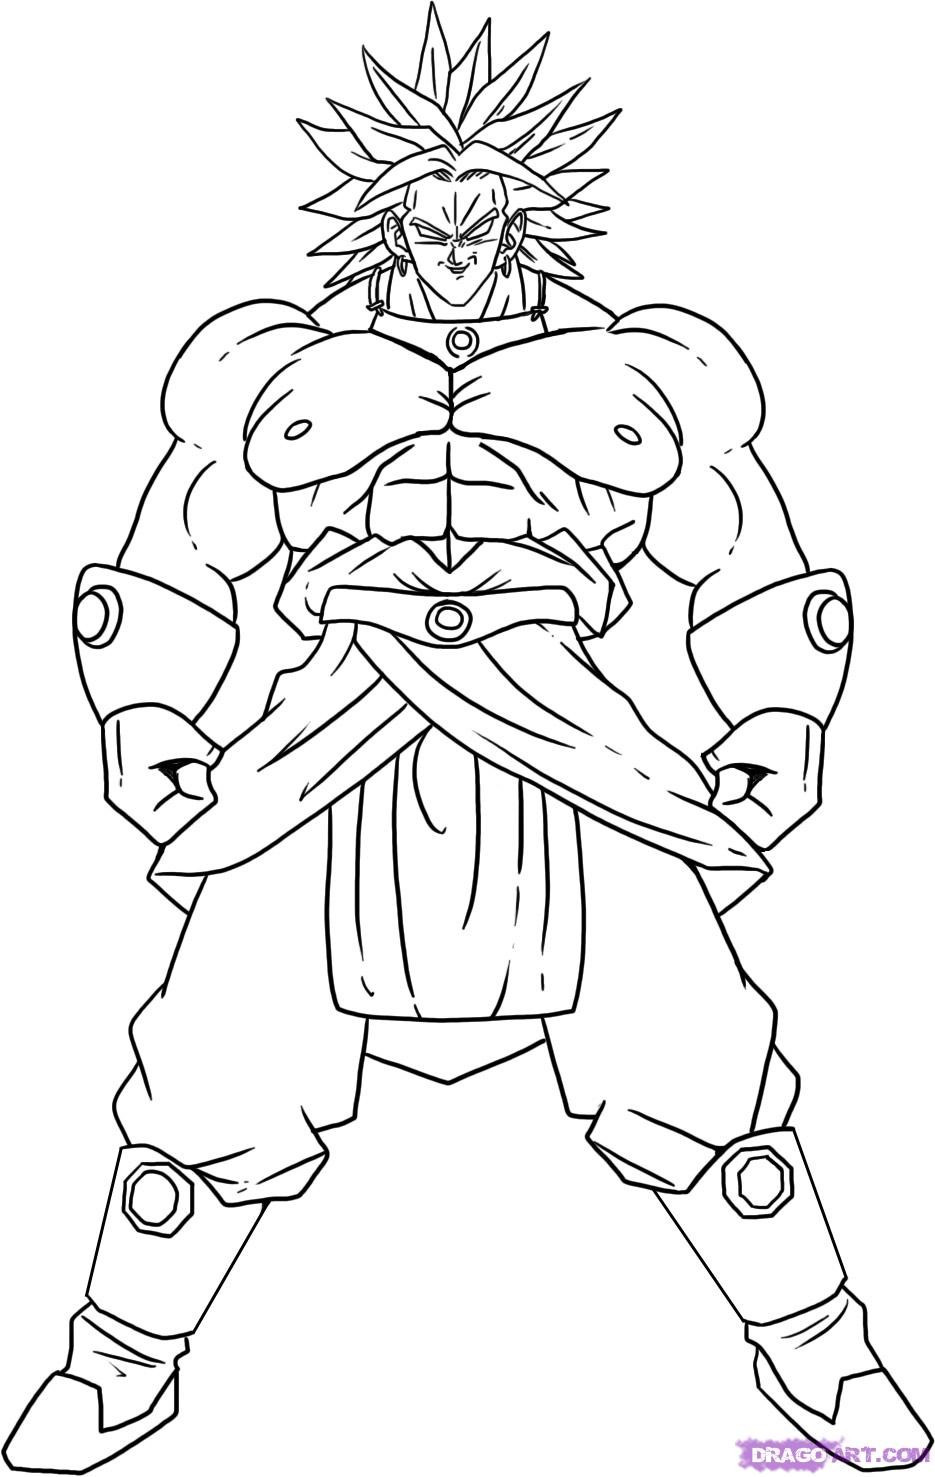 Dragonballz Coloring Pages
 Free Printable Dragon Ball Z Coloring Pages For Kids